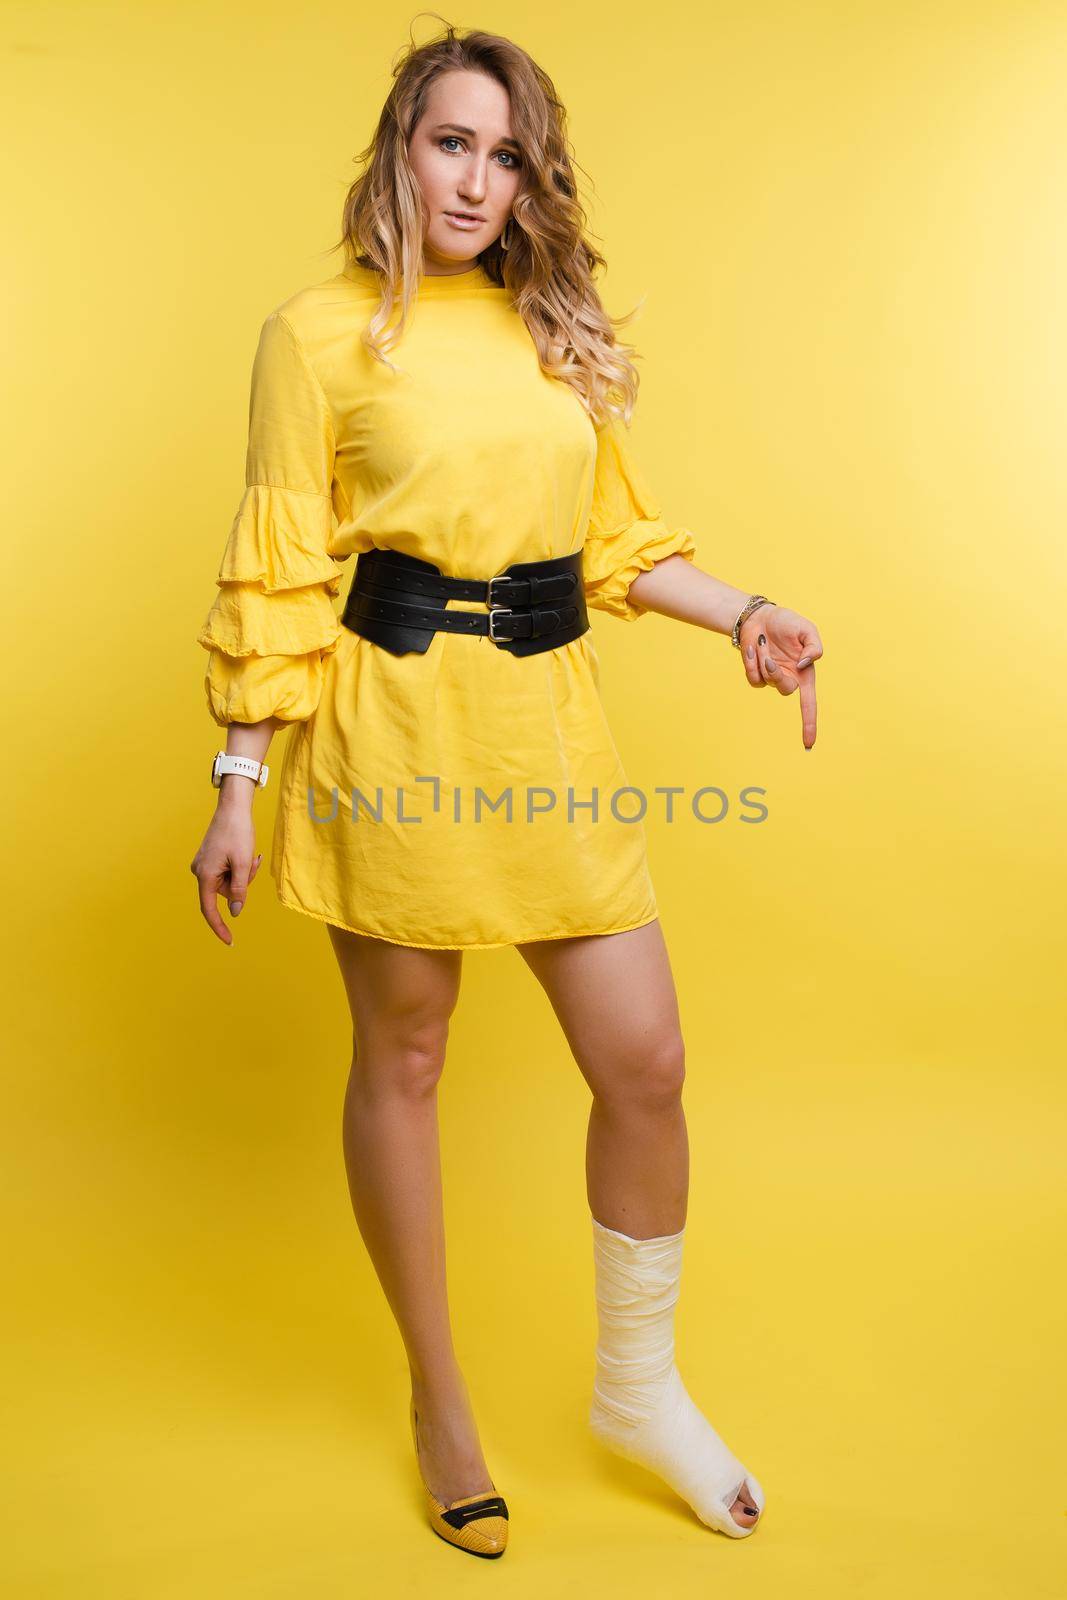 Full length studio portrait of beautiful caucasian woman in yellow dress with black belt pointing at her broken leg in plaster. Isolate on yellow background. Injury concept.